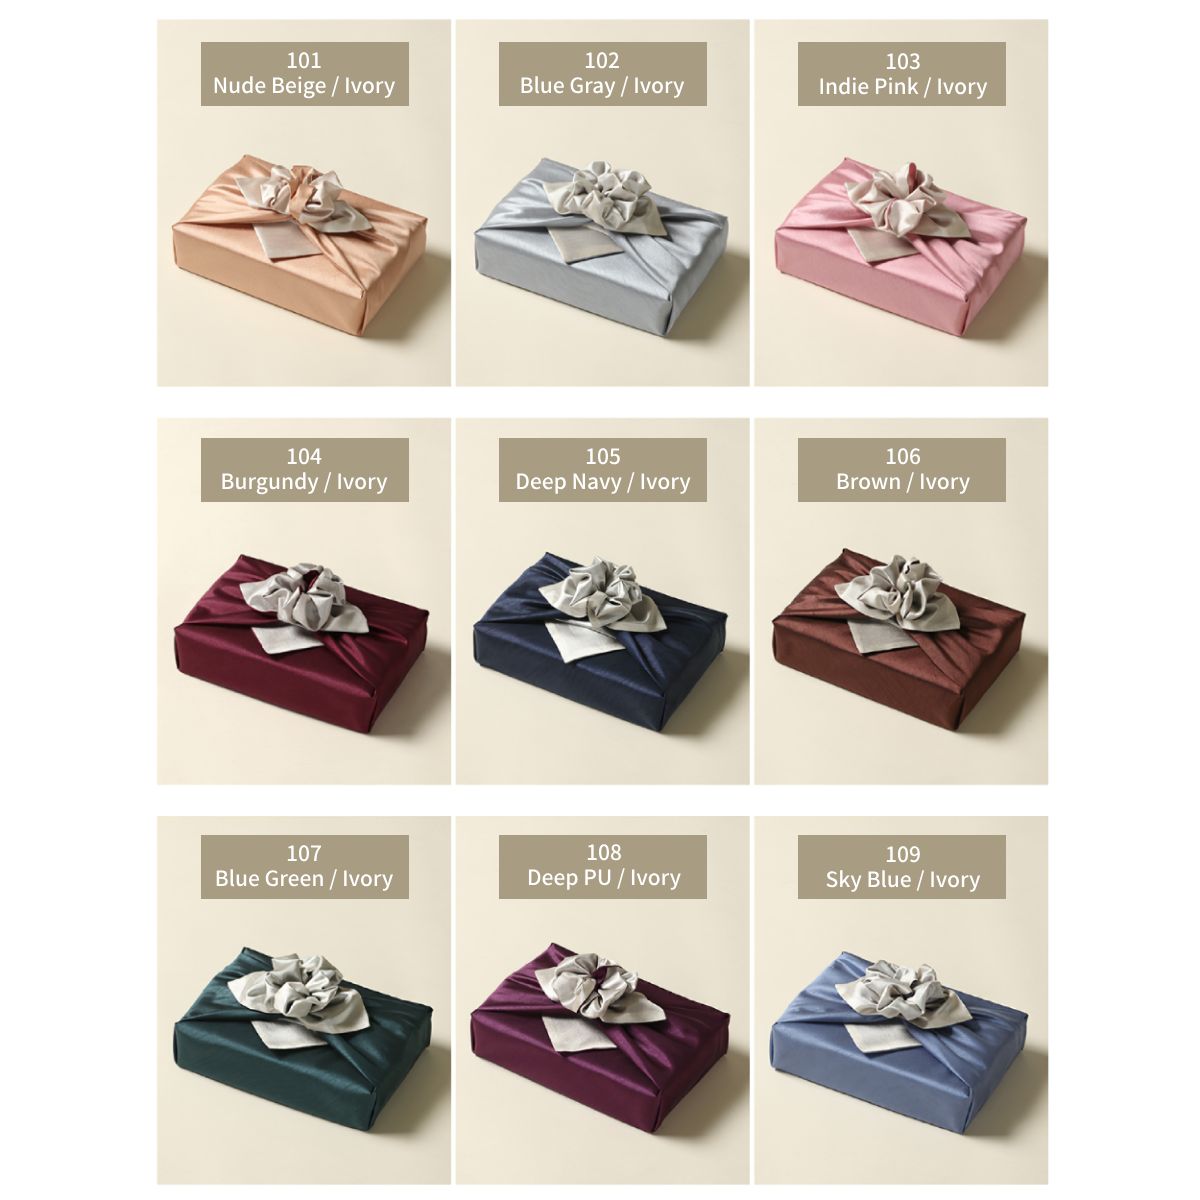 nine double-sided color of Bojagi. the first row:nude beige&ivory,blue grey&ivory,indie pink&ivory. the second row:burgundy&ivory,deep navy&ivory,brown&ivory. the third row:blue green&ivory,deep purple&ivory,sky blue&ivory.